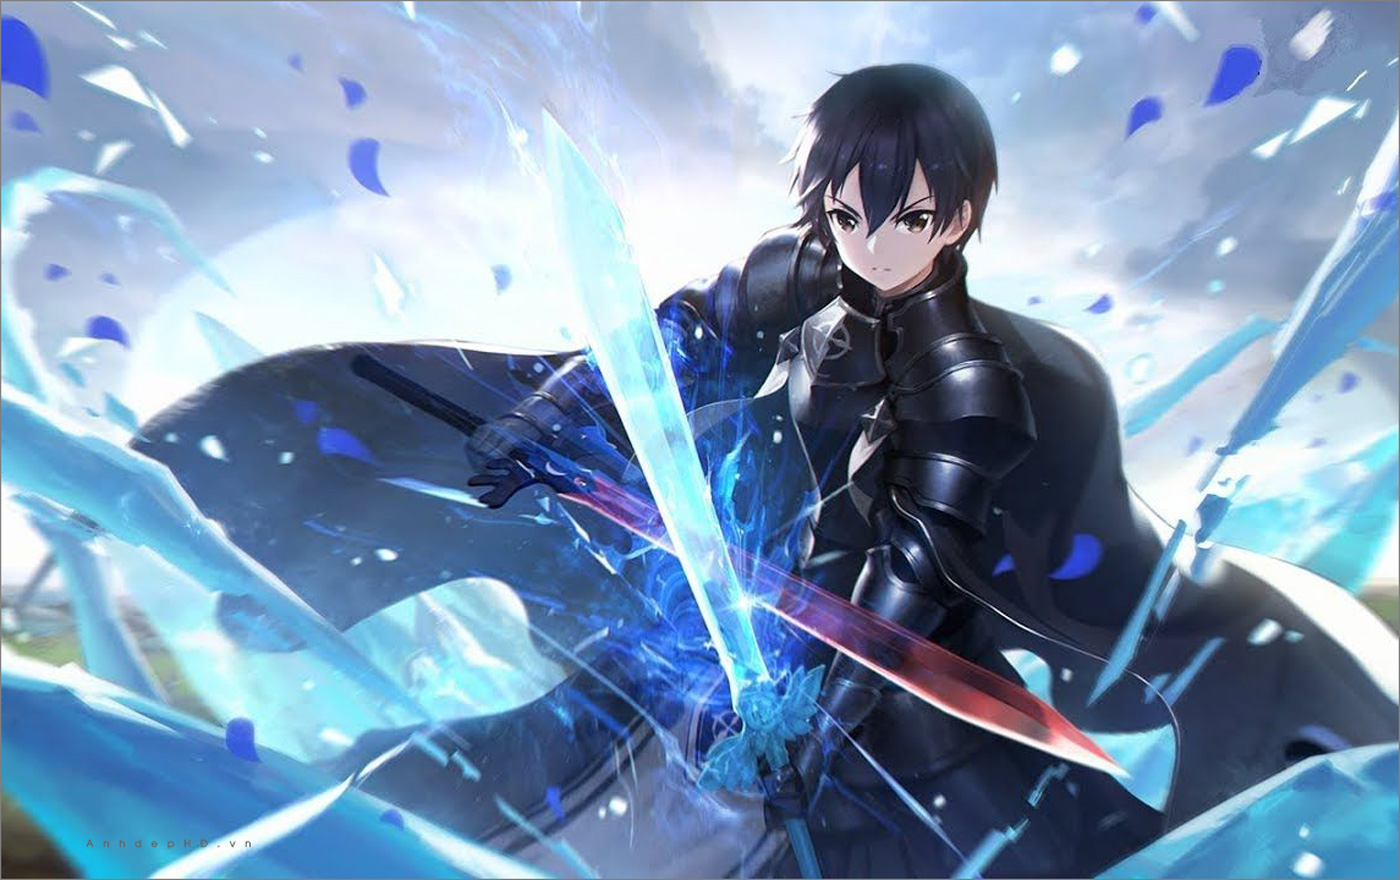 20 Kirito And Asuna Wallpapers for iPhone and Android by Benjamin Ross